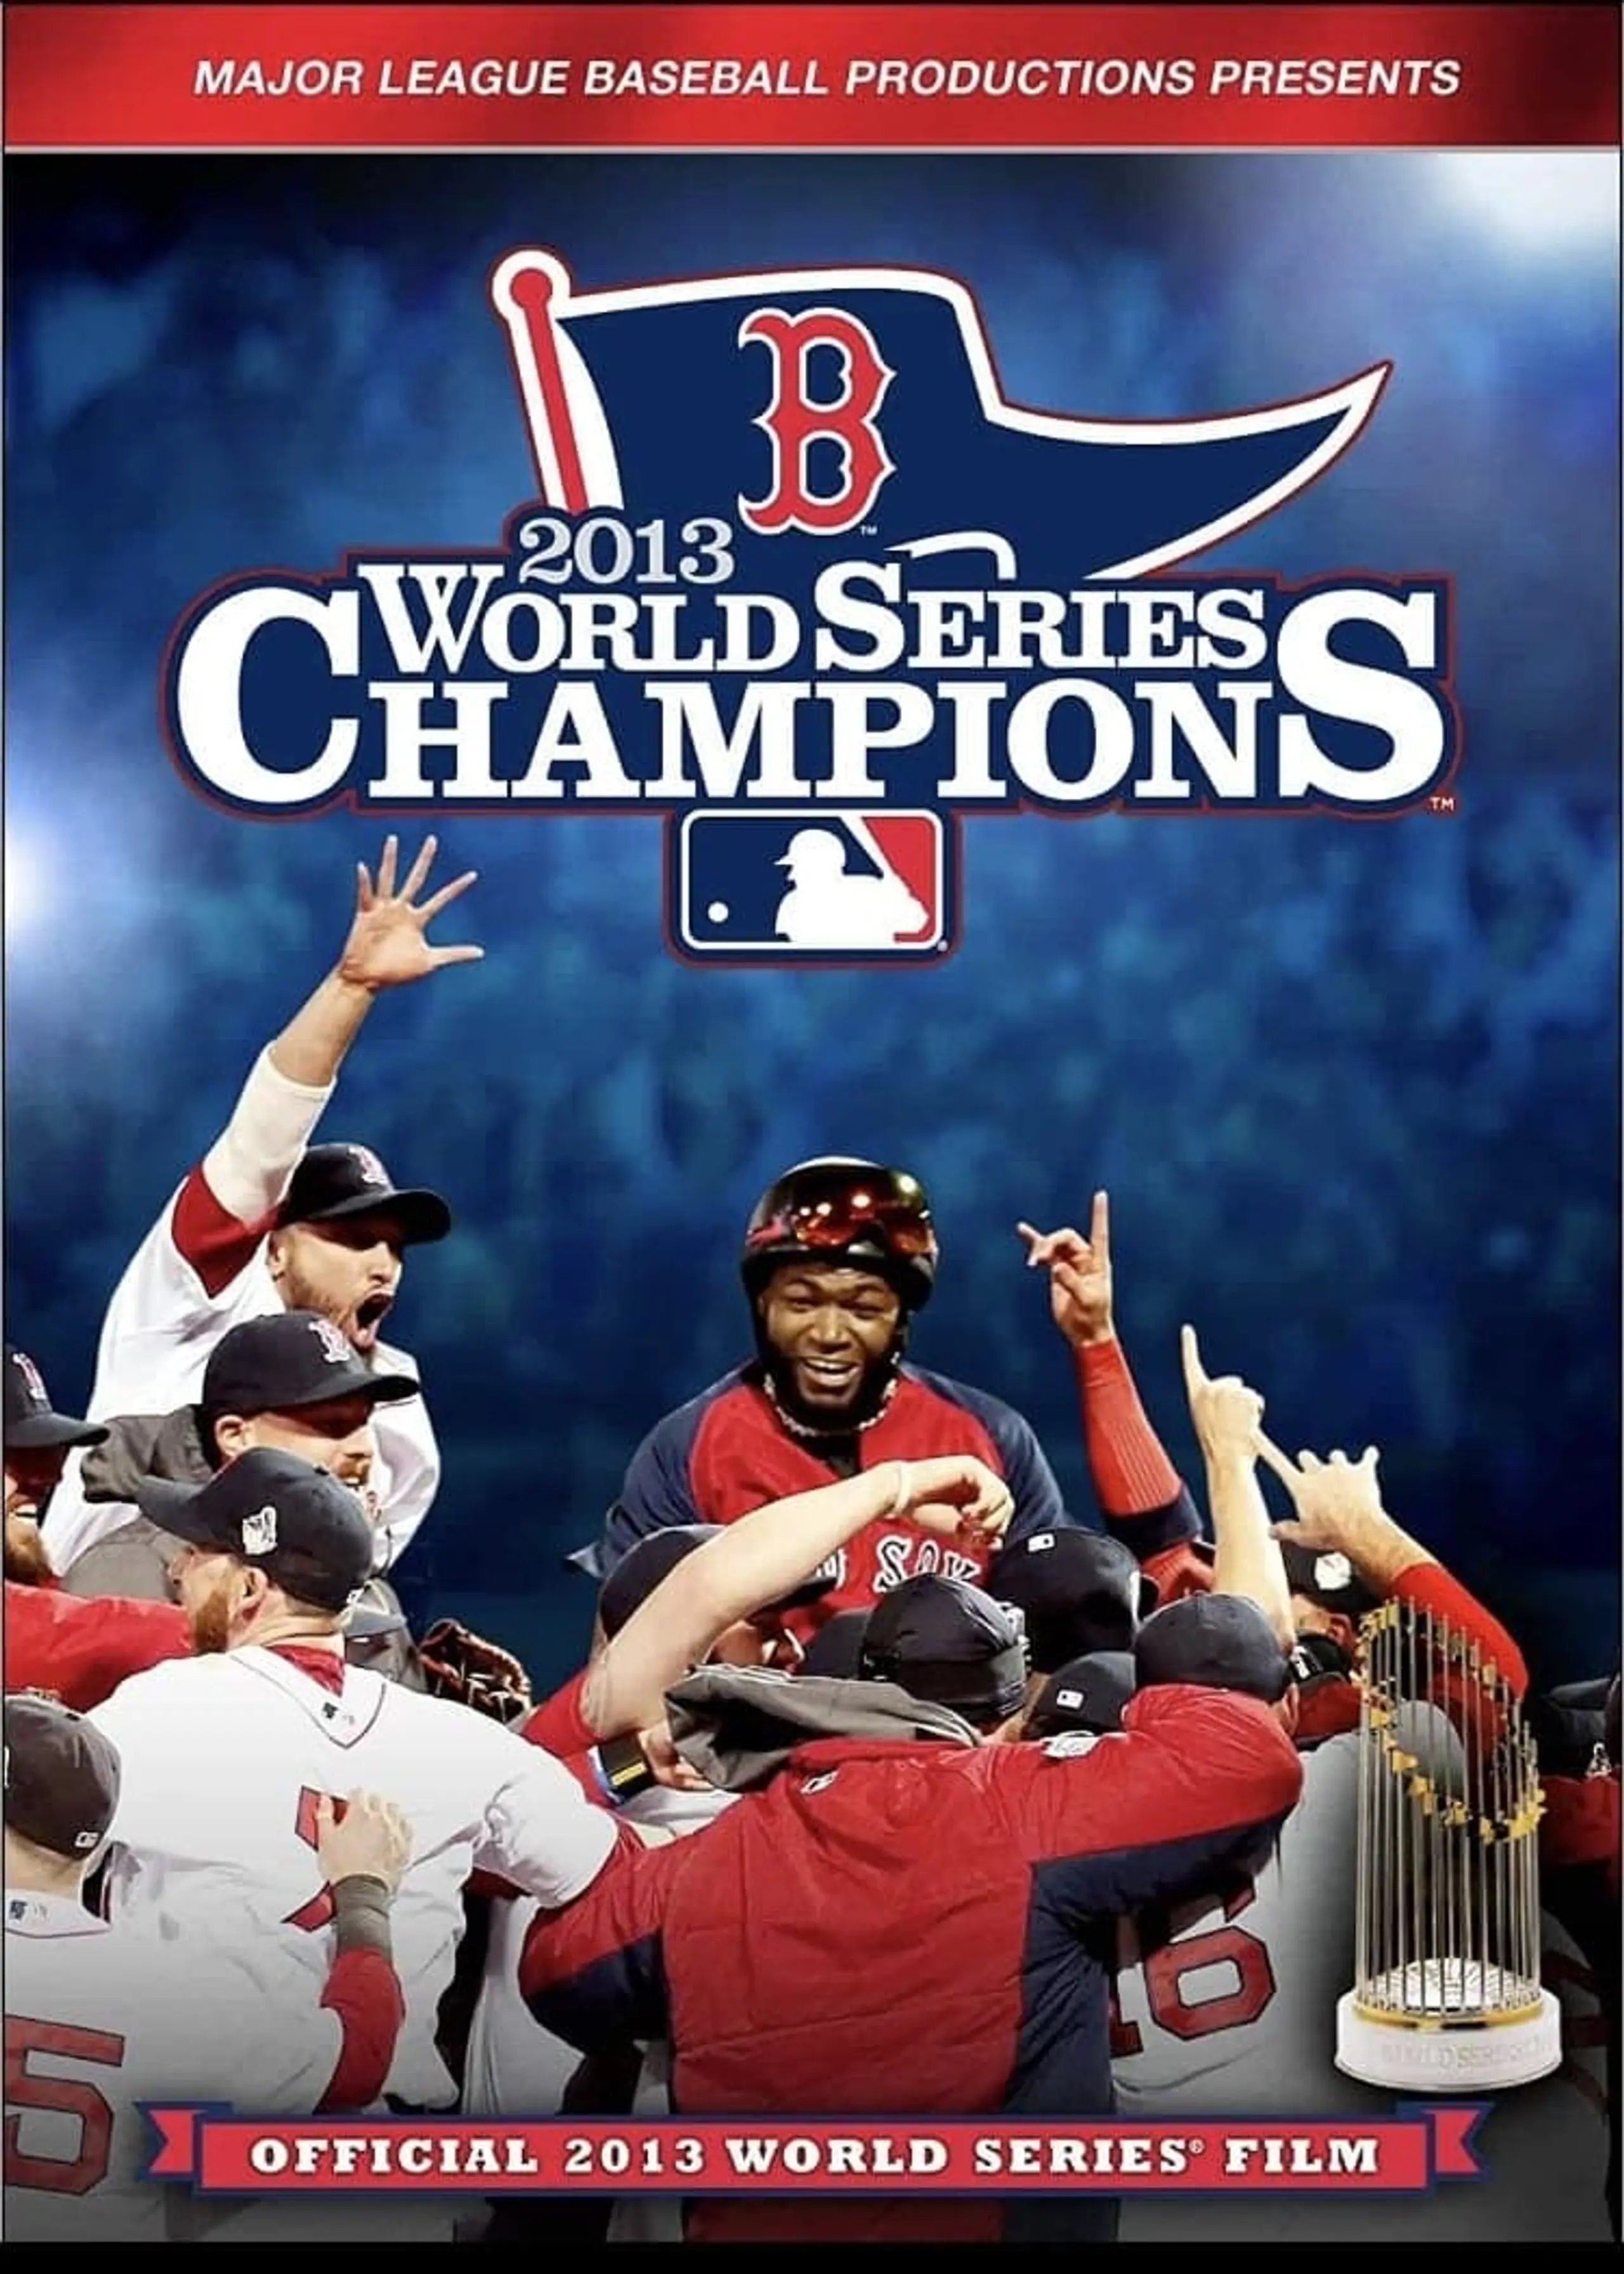 The Official 2013 World Series Film